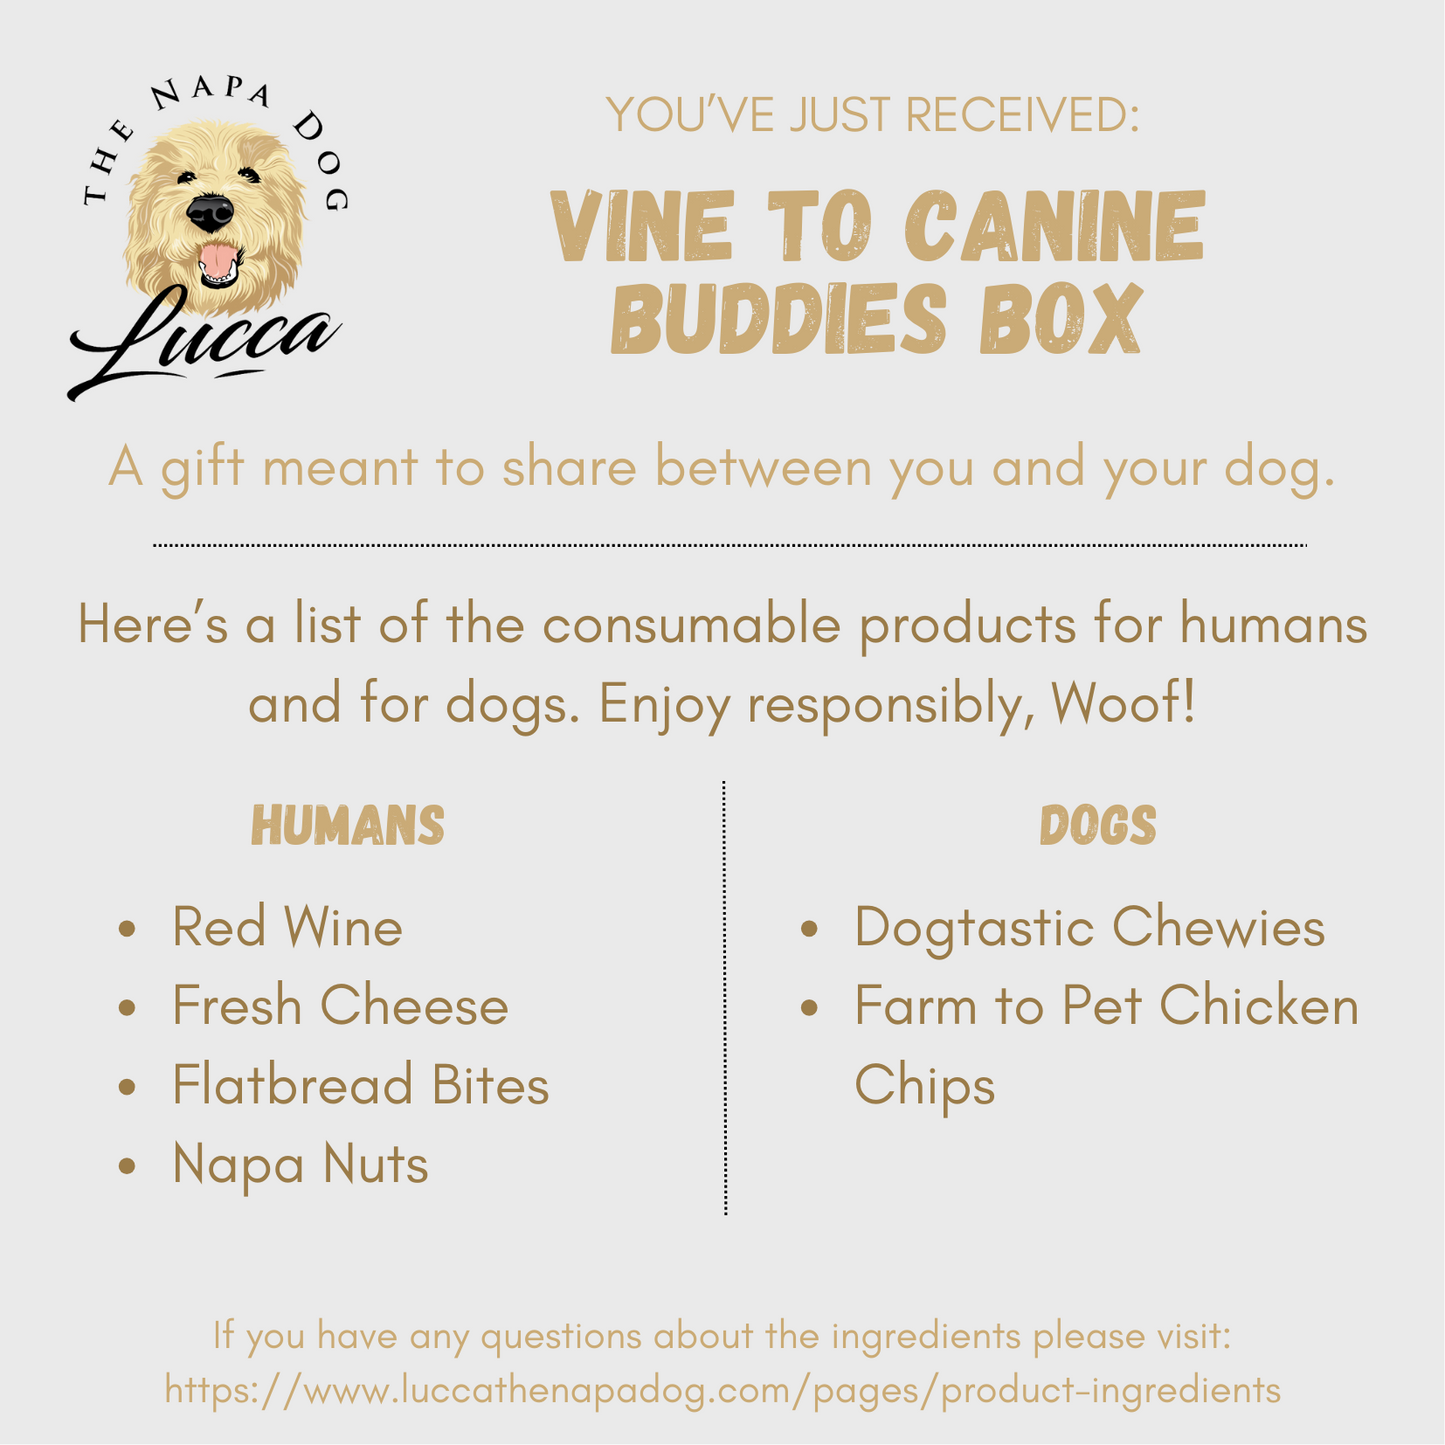 ingredient insert information card included in this gift vine to canine buddies by lucca gift box